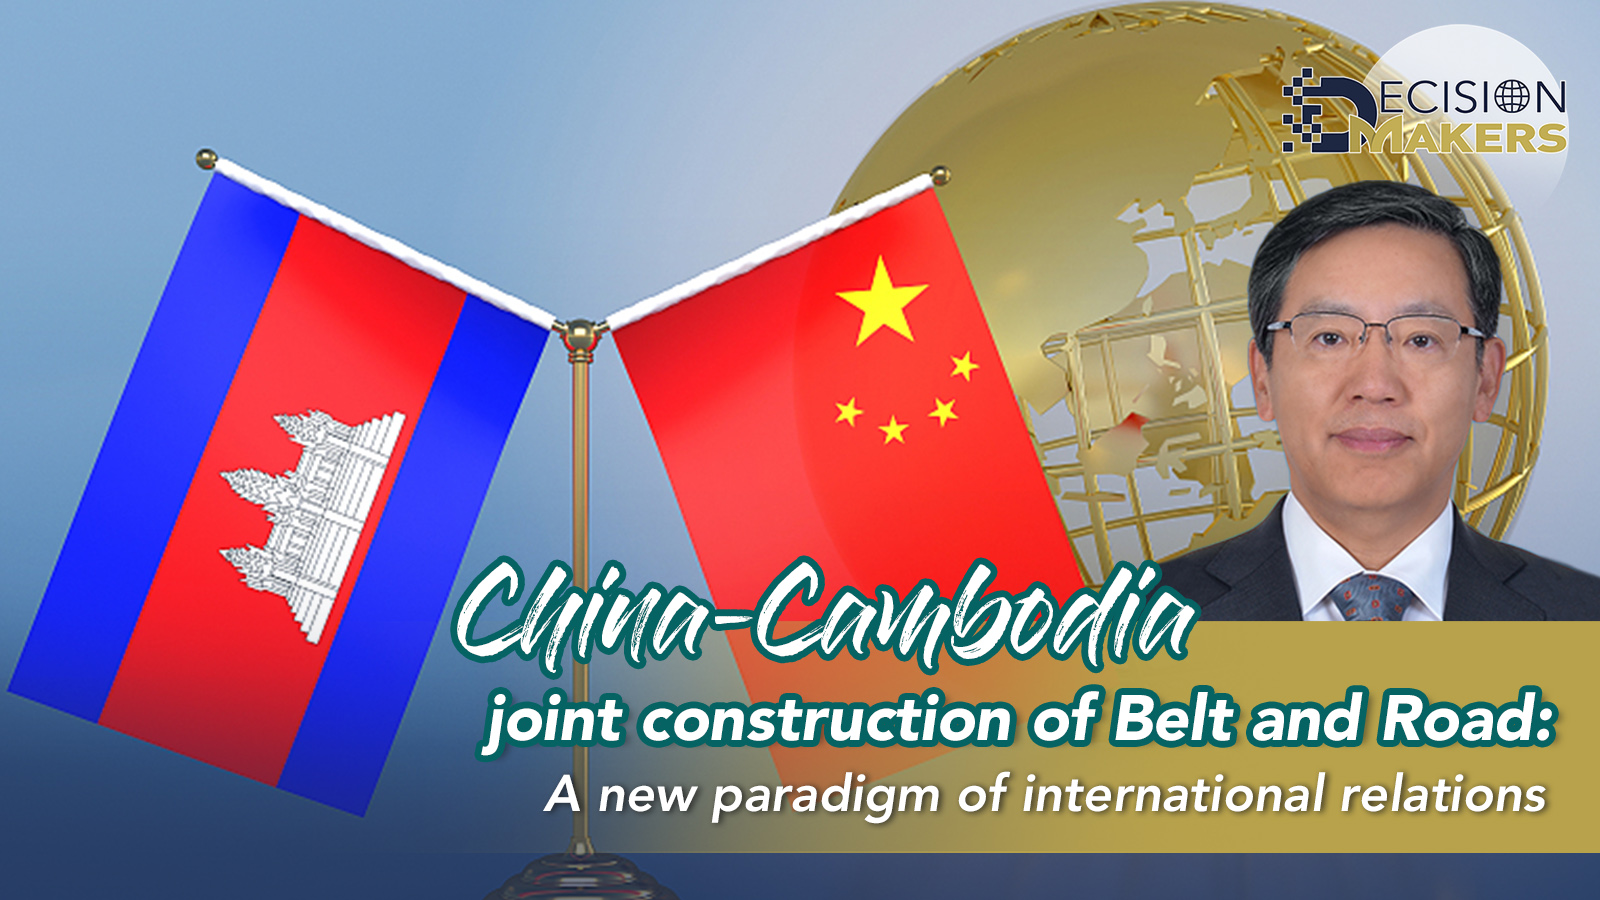 China-Cambodia joint construction of Belt and Road: A new paradigm of international relations